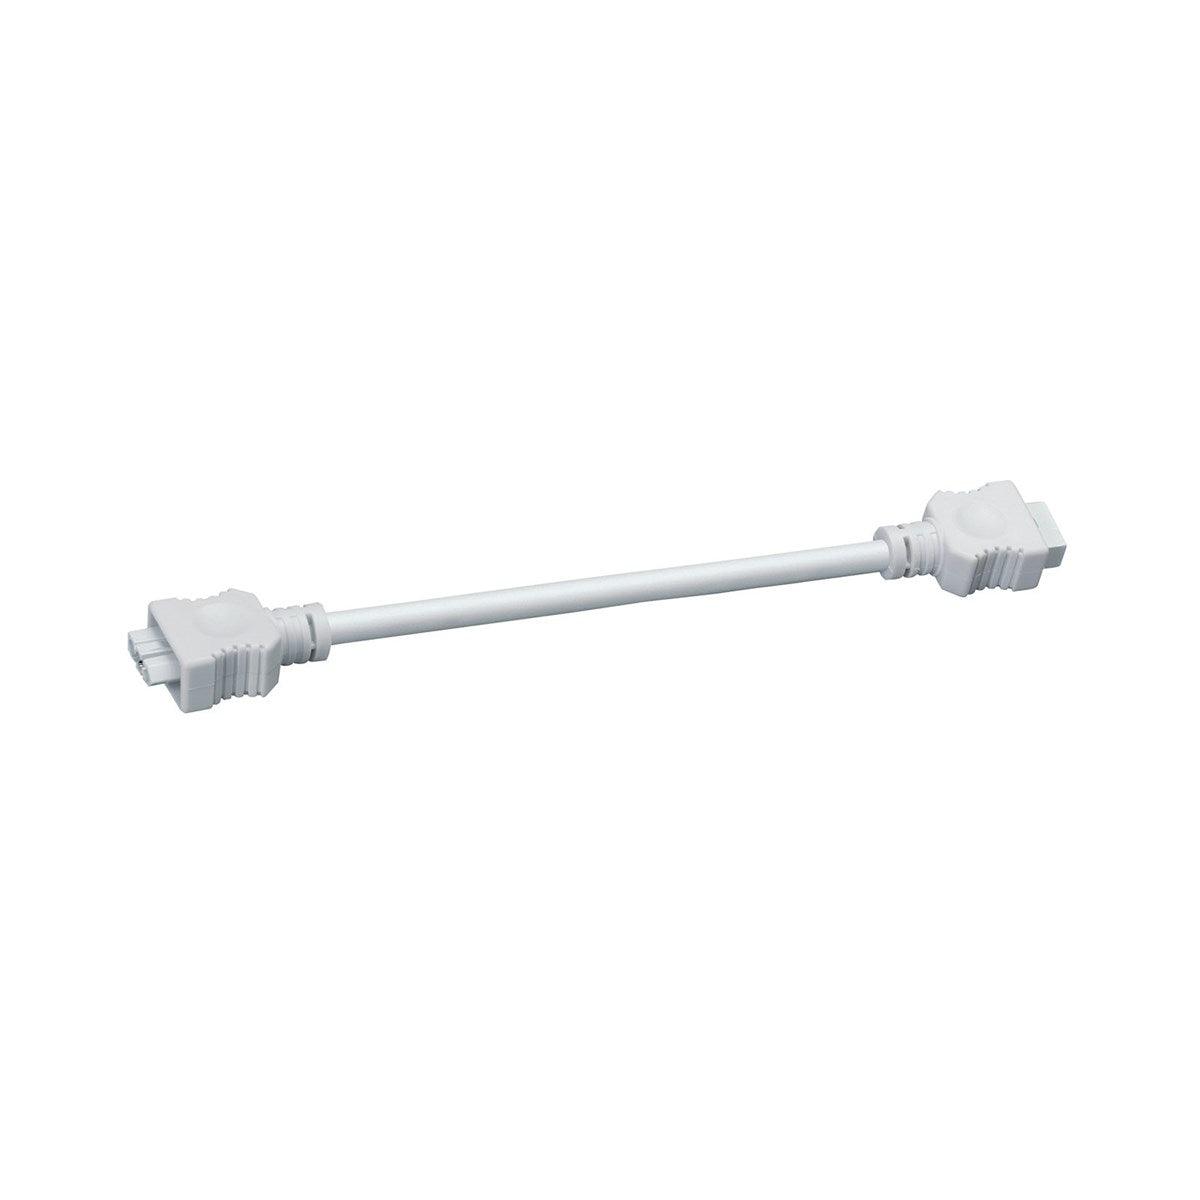 9in. Interconnect Cable for 6U Under cabinet lights, White